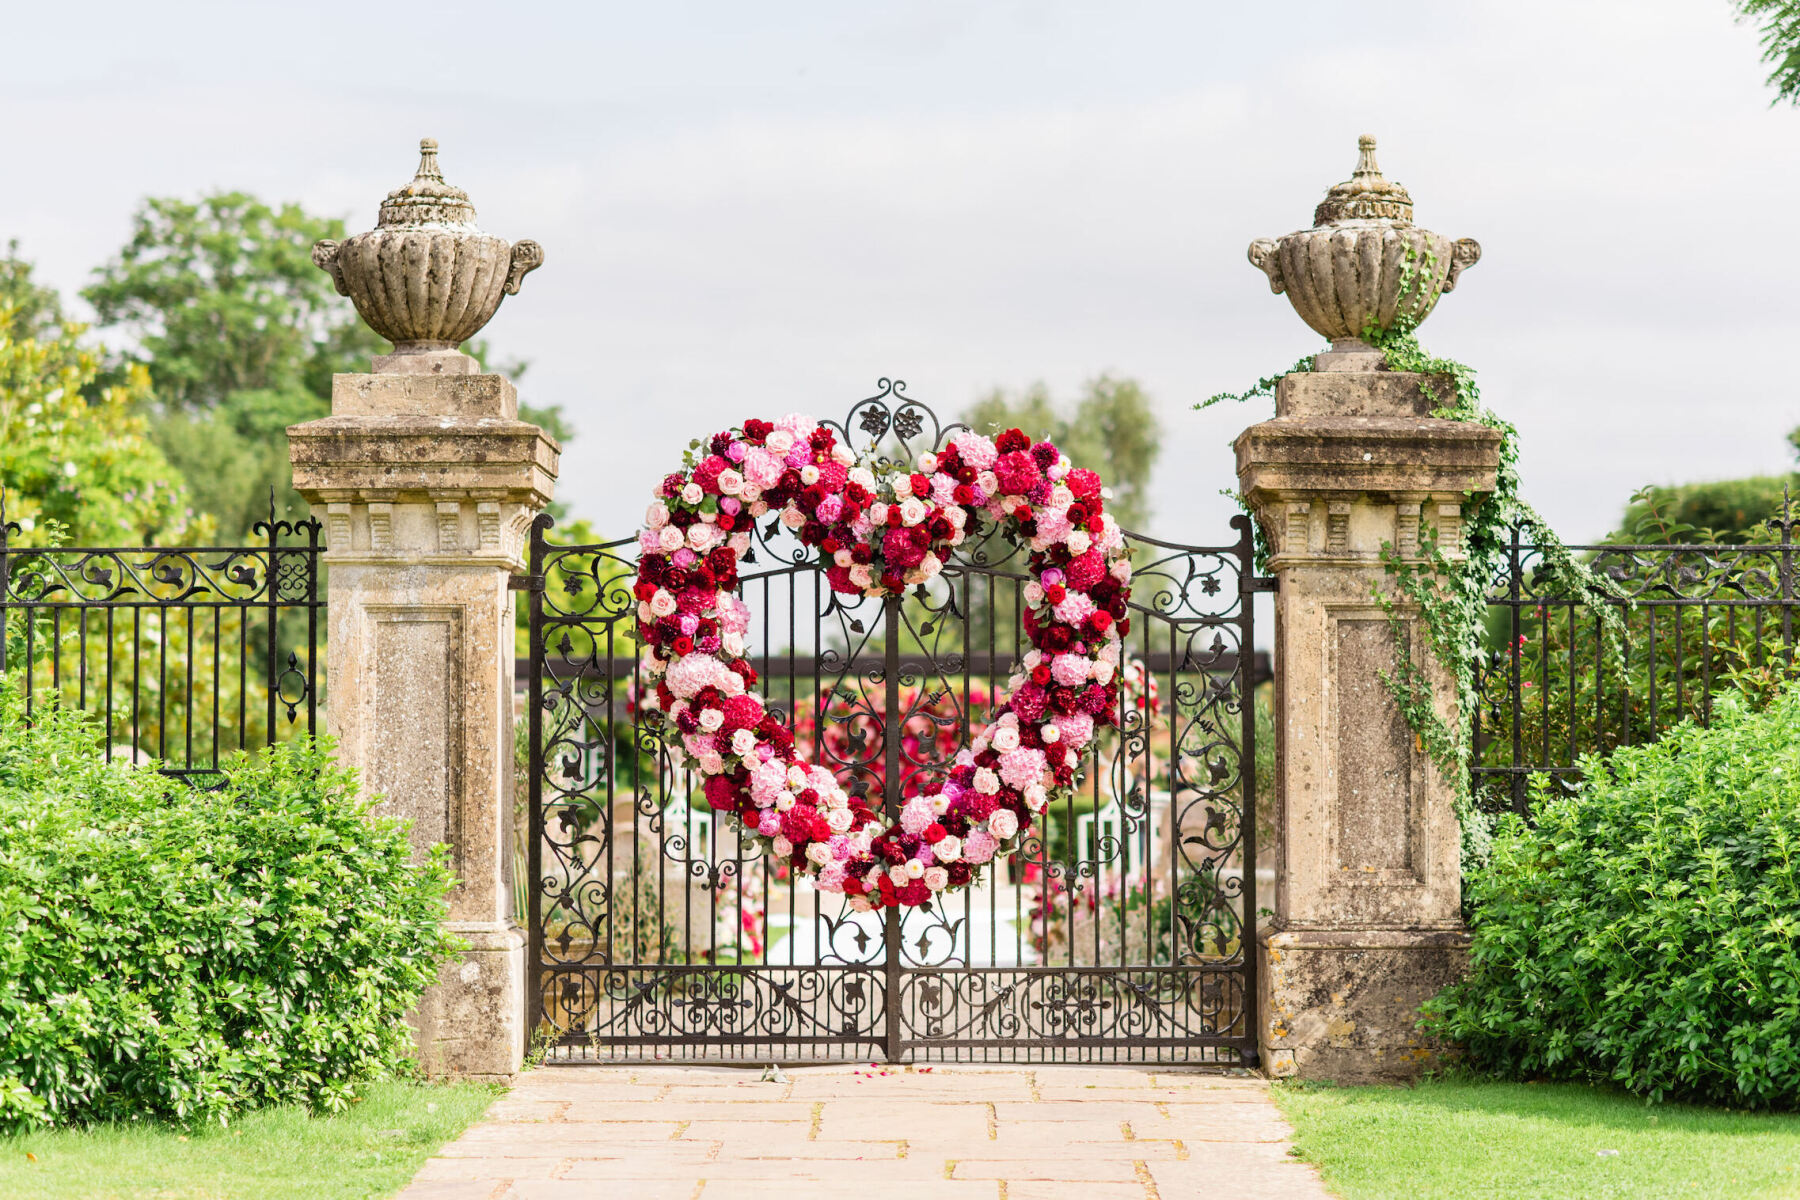 A pink-and-red heart-shaped wreath decorates the gates of the Four Seasons Hampshire for the first day of a colorful countryside wedding.